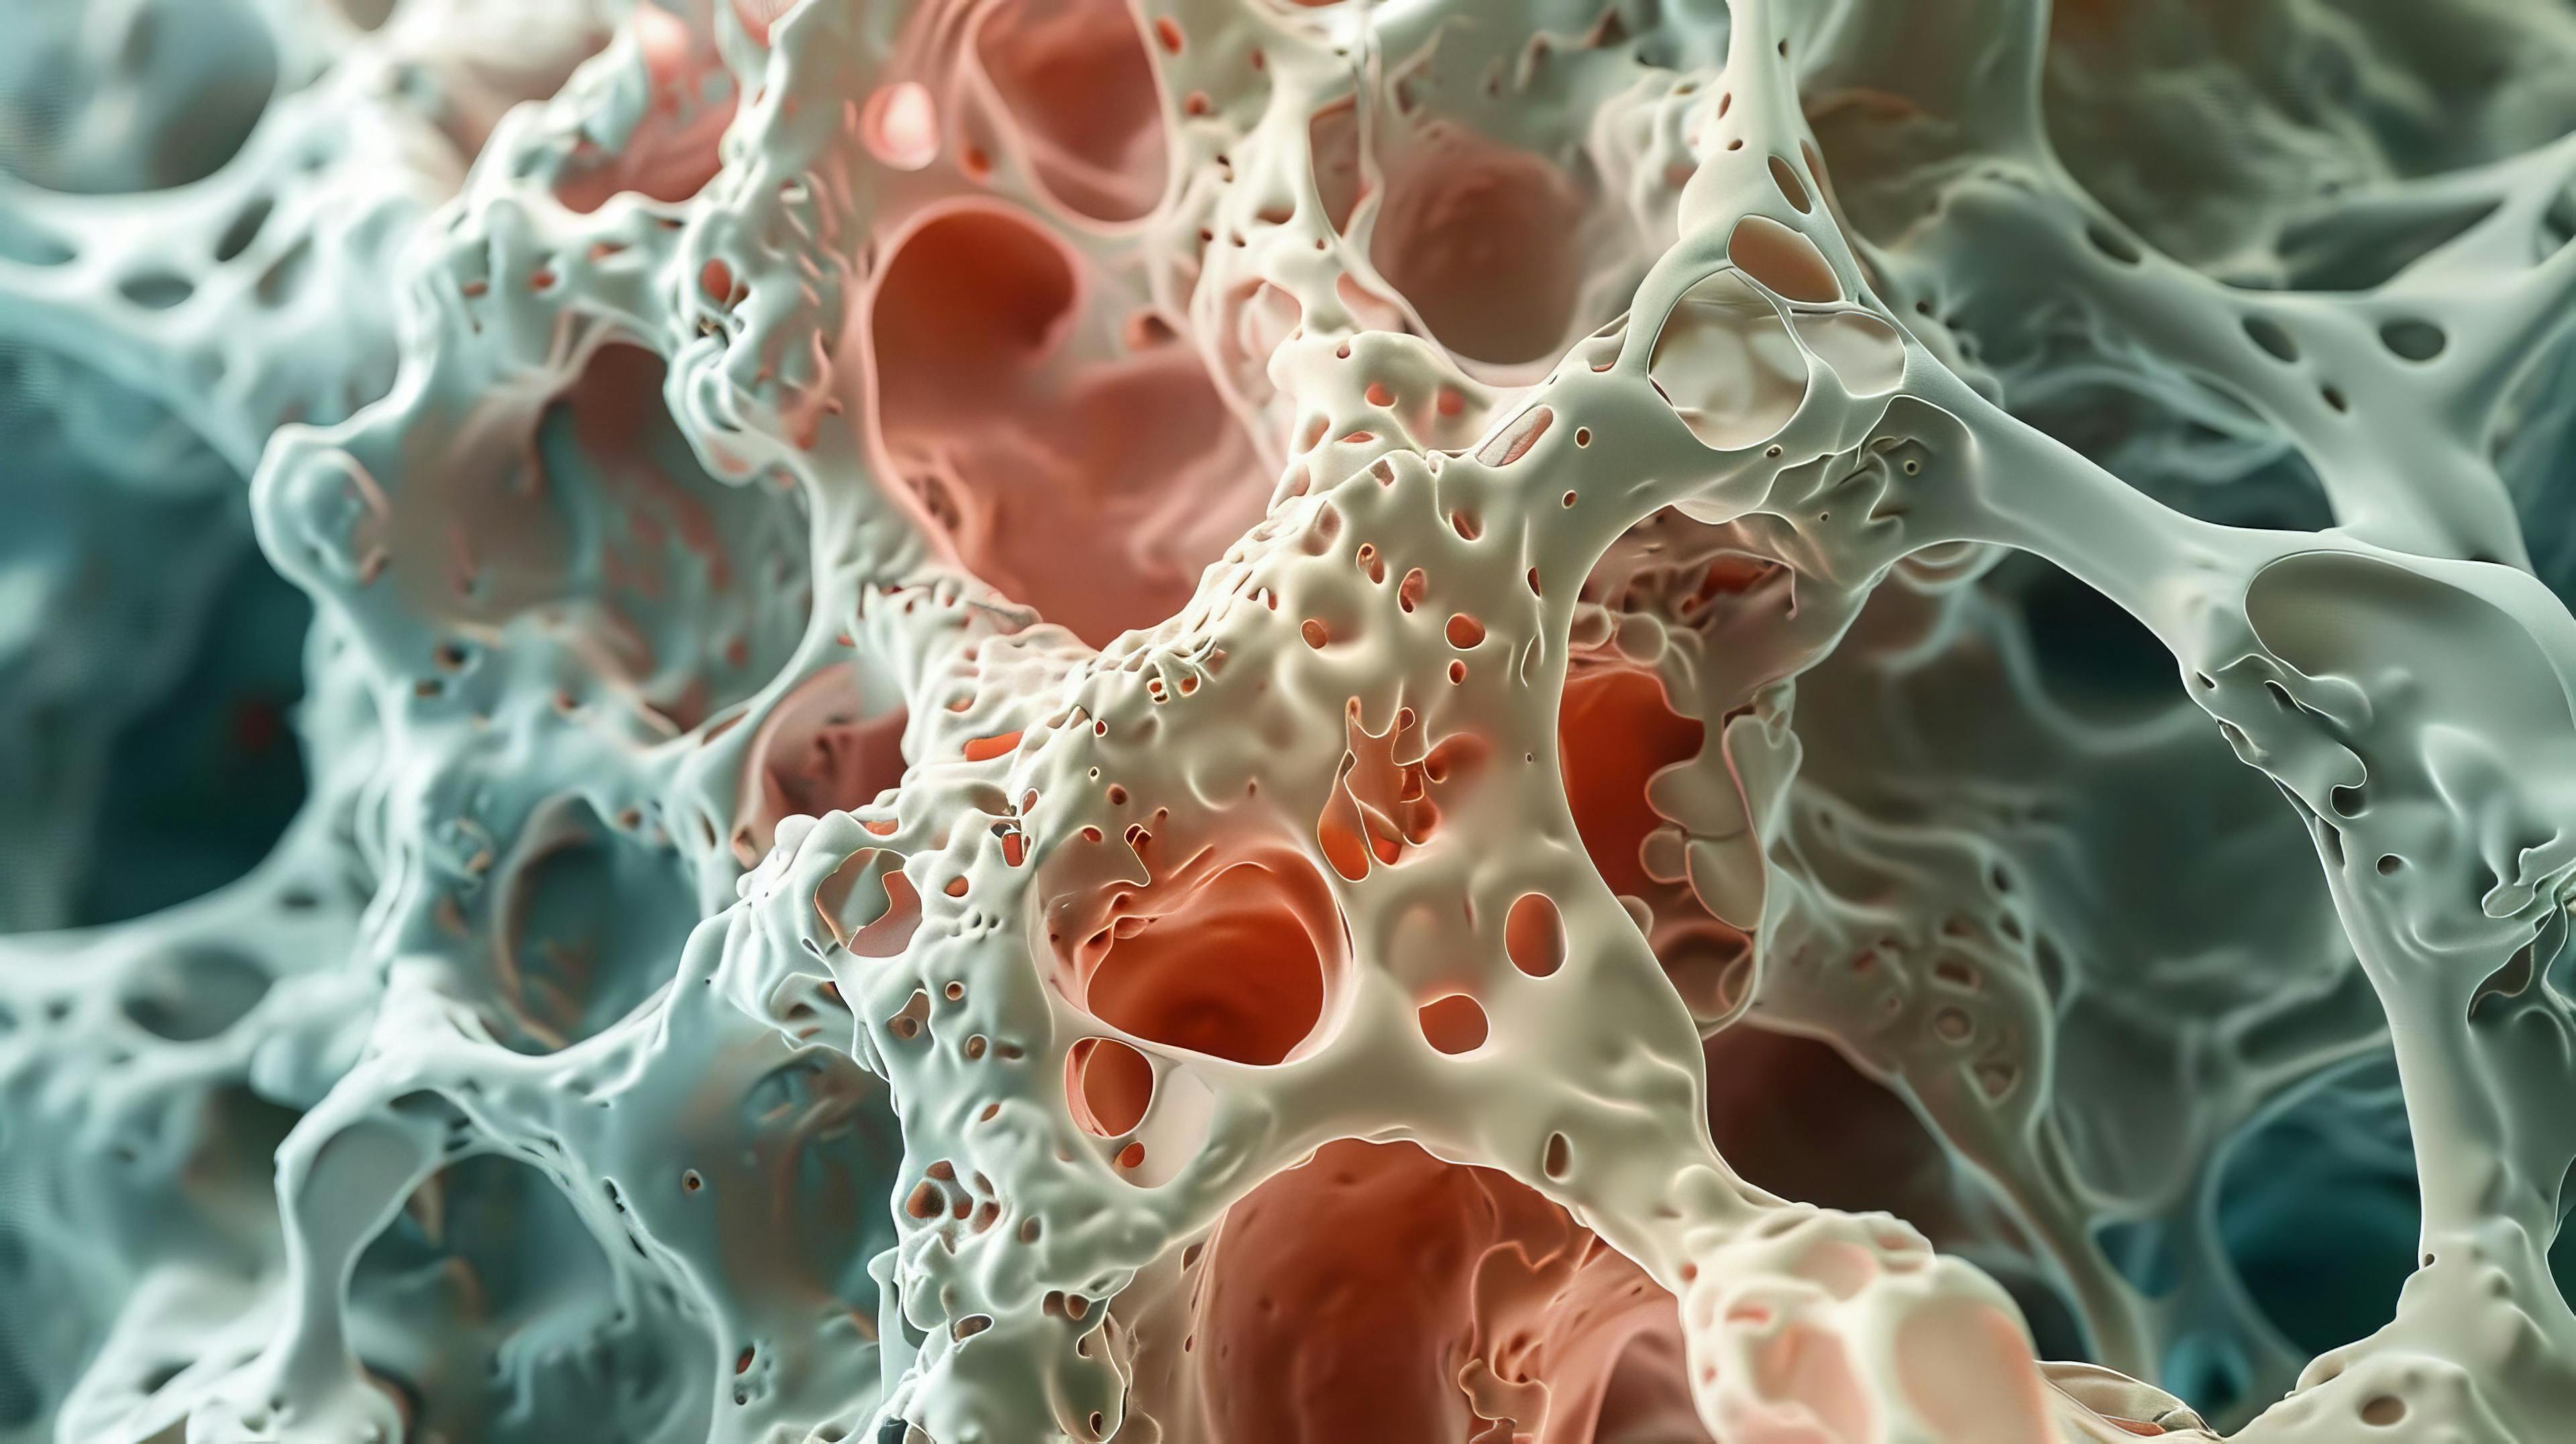 Comprehensive Atlas on Bone Marrow Cells Could Be Game Changer